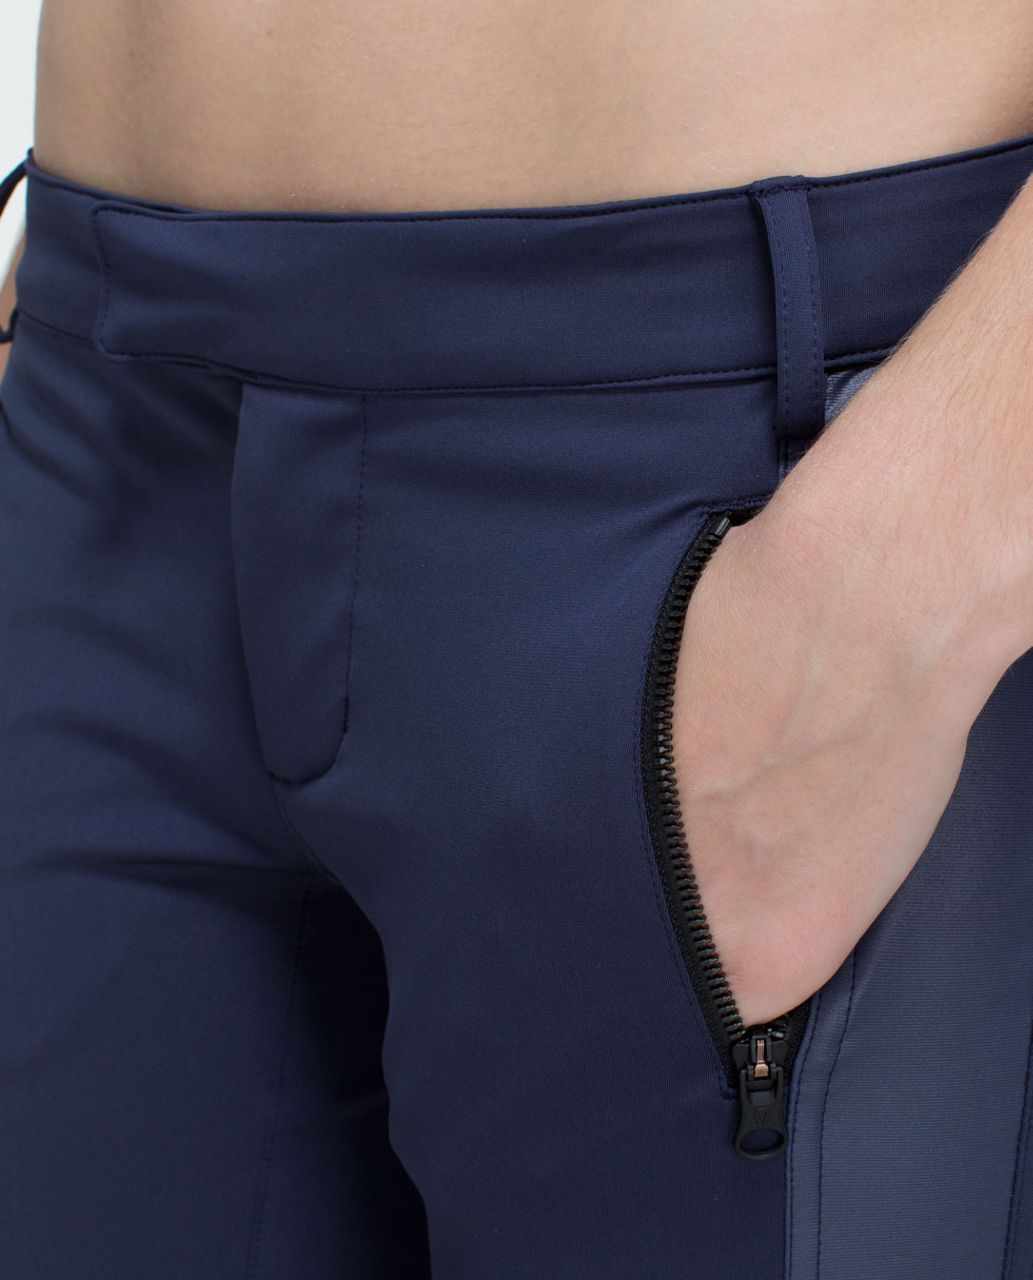 Lululemon Here To There Pant - Cadet Blue